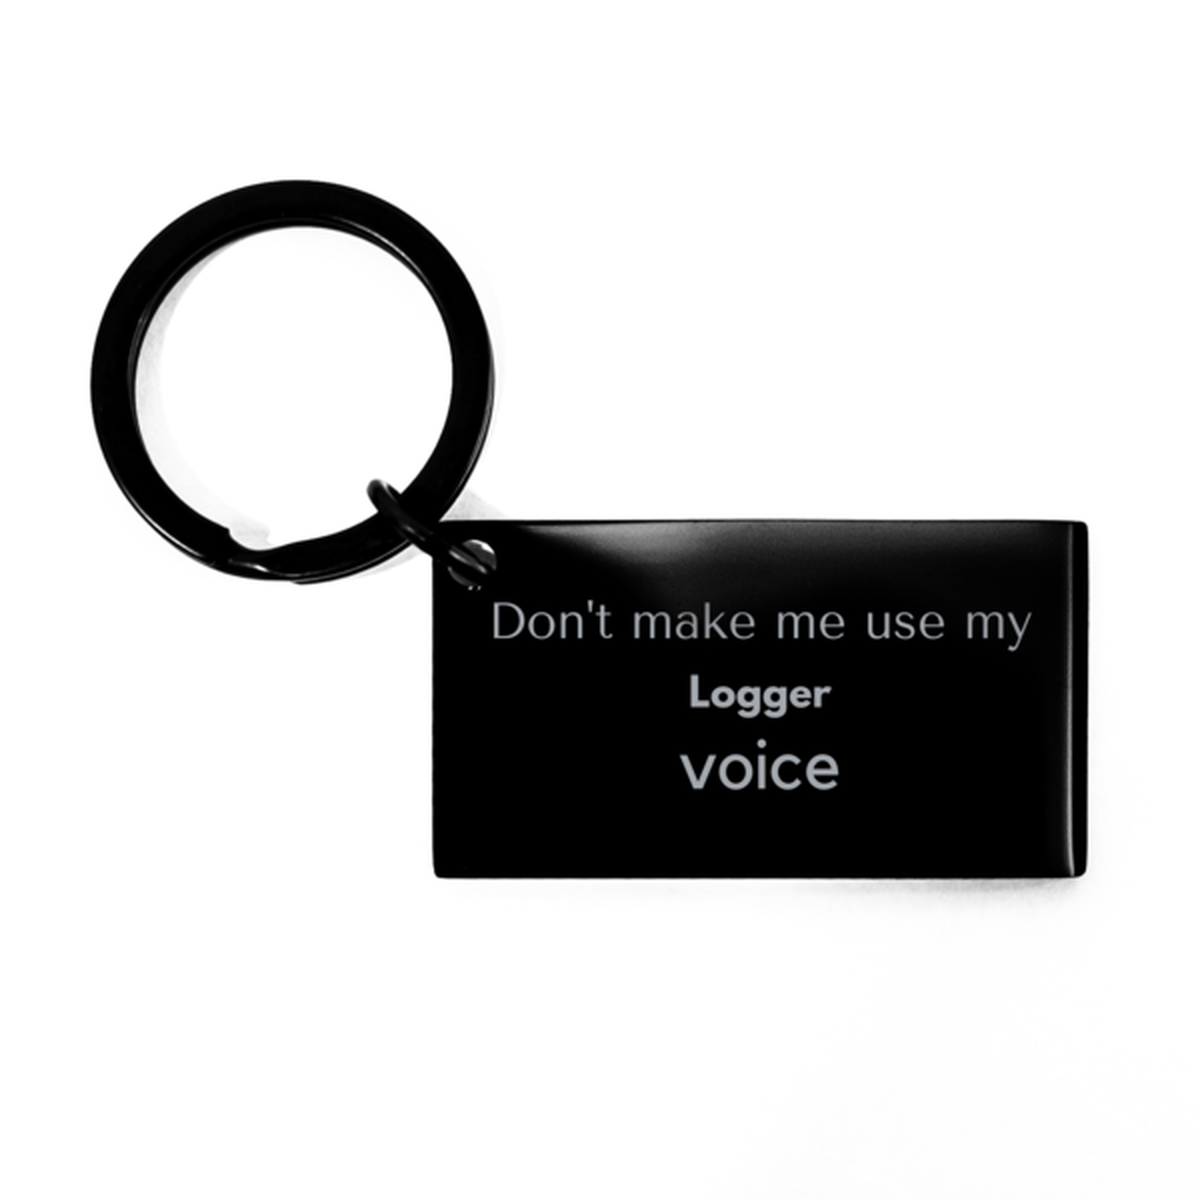 Don't make me use my Logger voice, Sarcasm Logger Gifts, Christmas Logger Keychain Birthday Unique Gifts For Logger Coworkers, Men, Women, Colleague, Friends